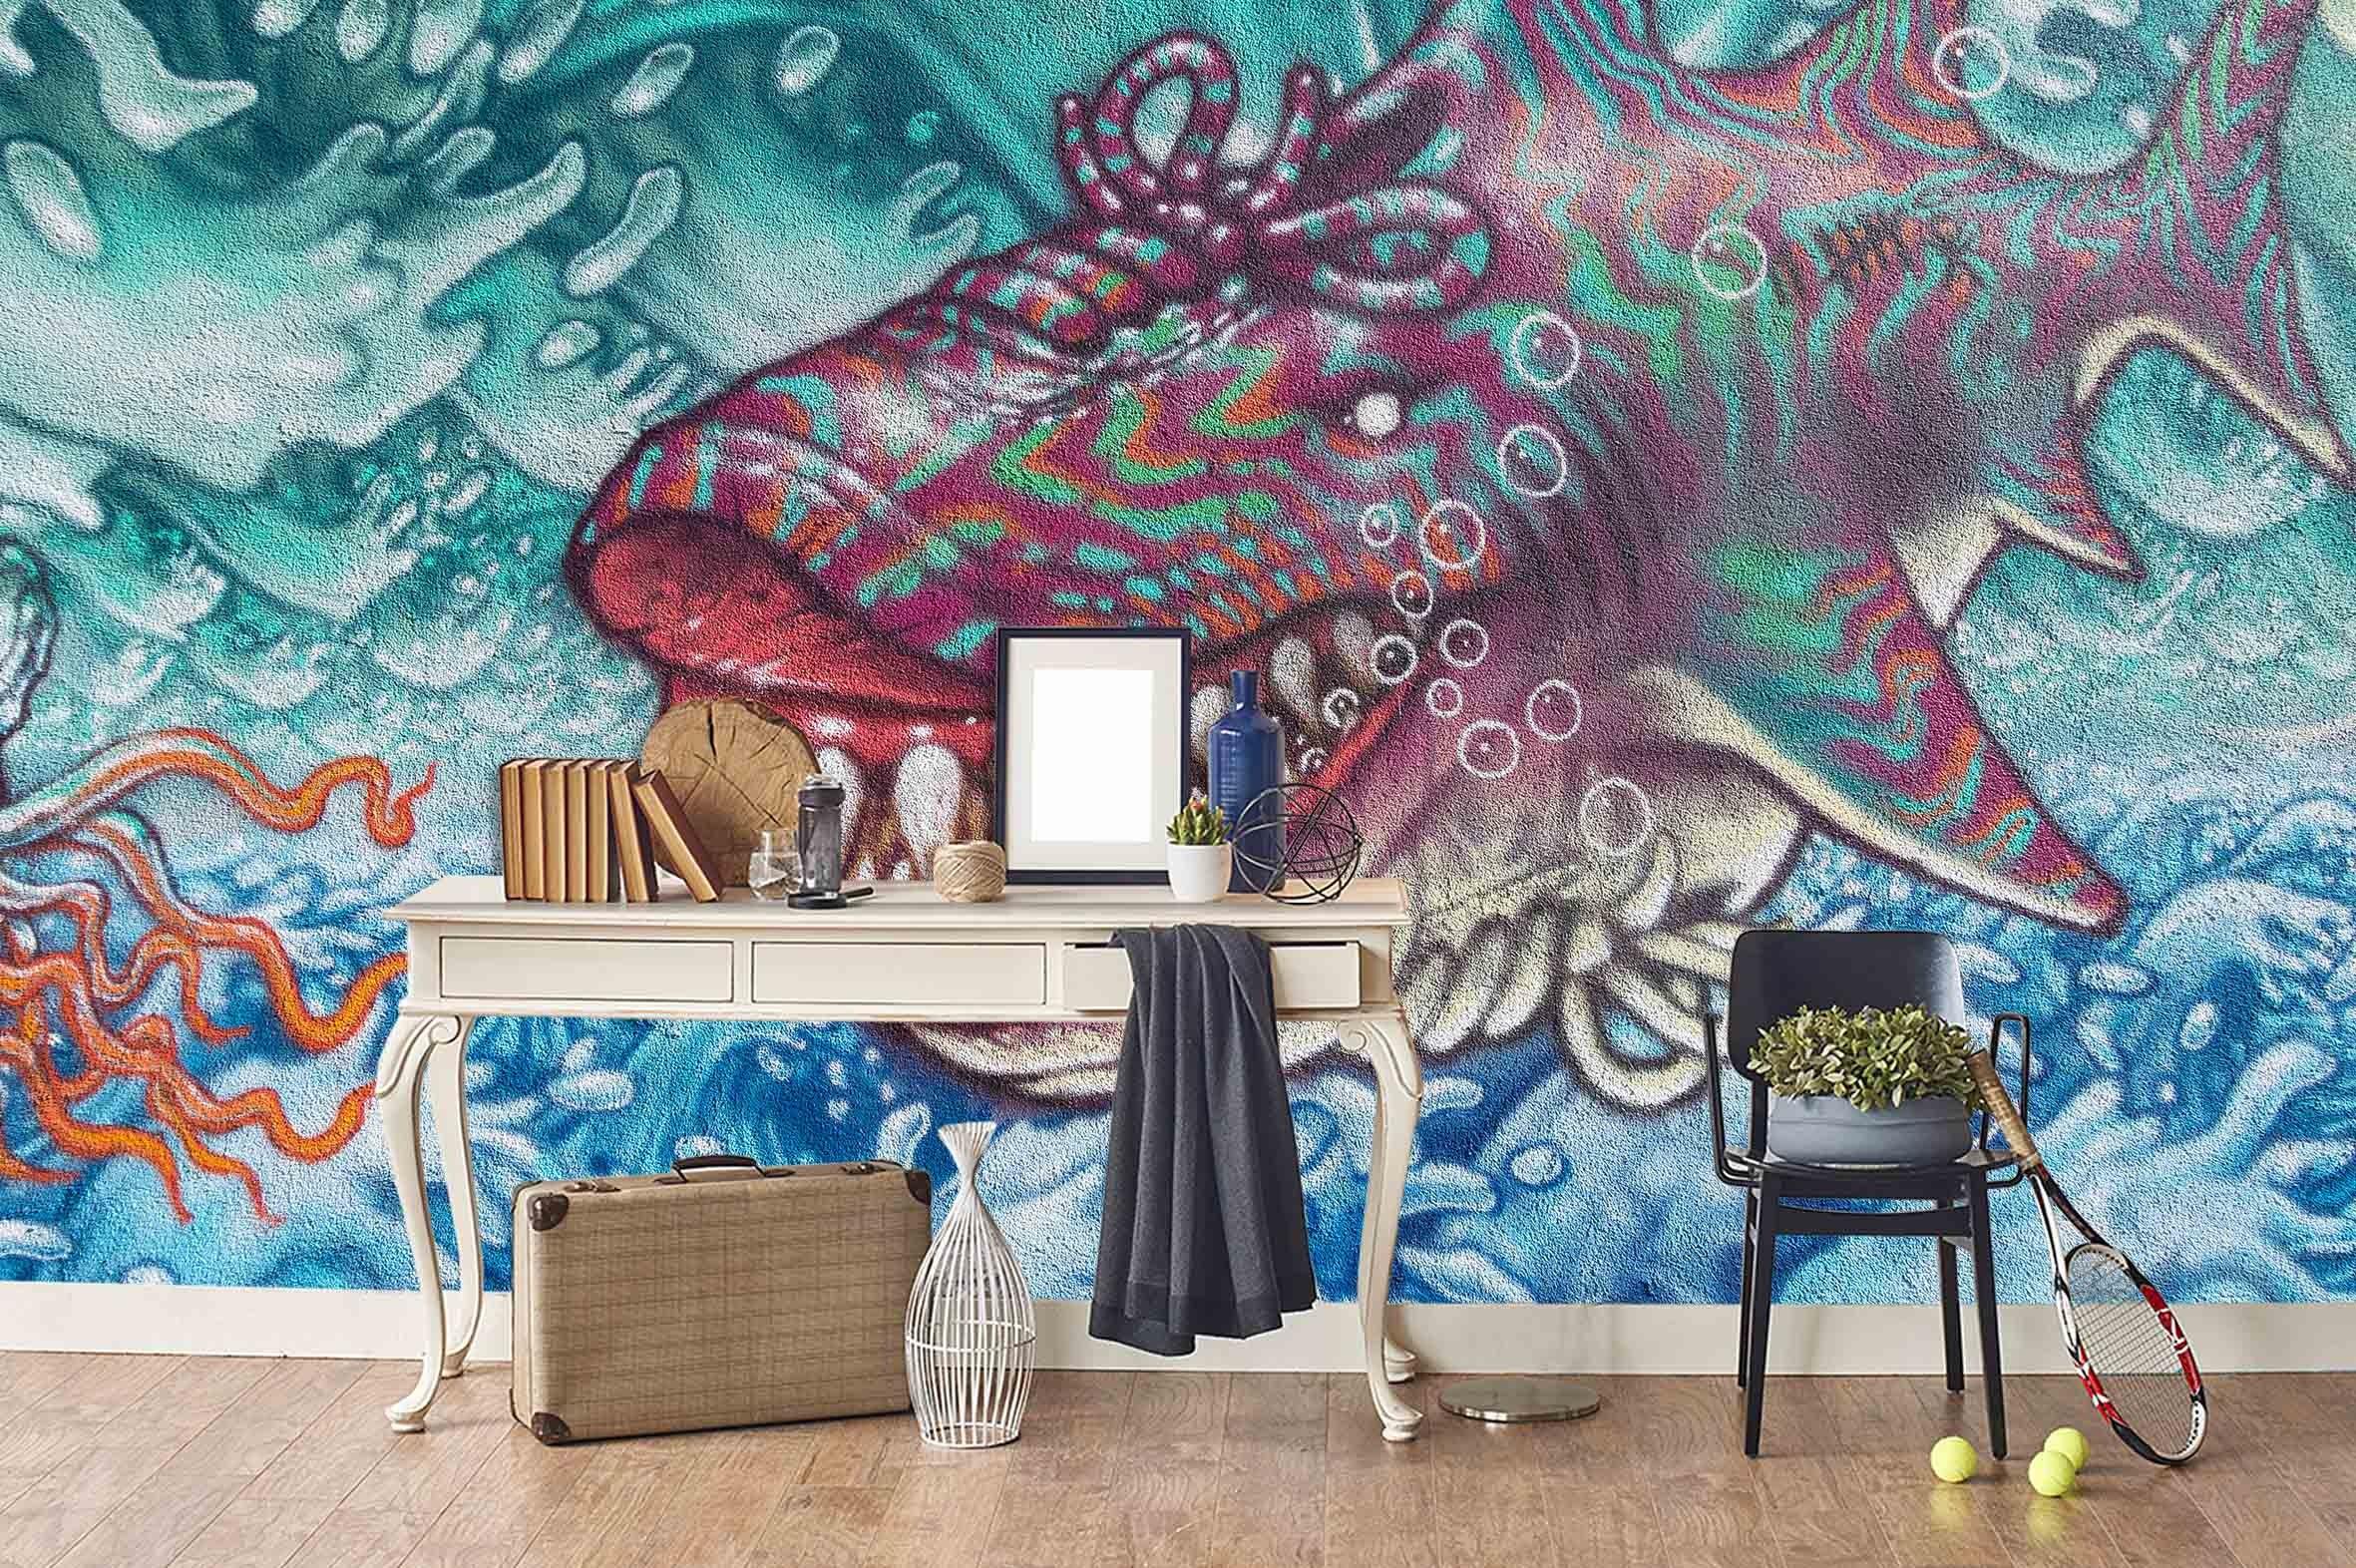 3D Abstract Seabed Fish Monster Wall Mural Wallpaper 145- Jess Art Decoration